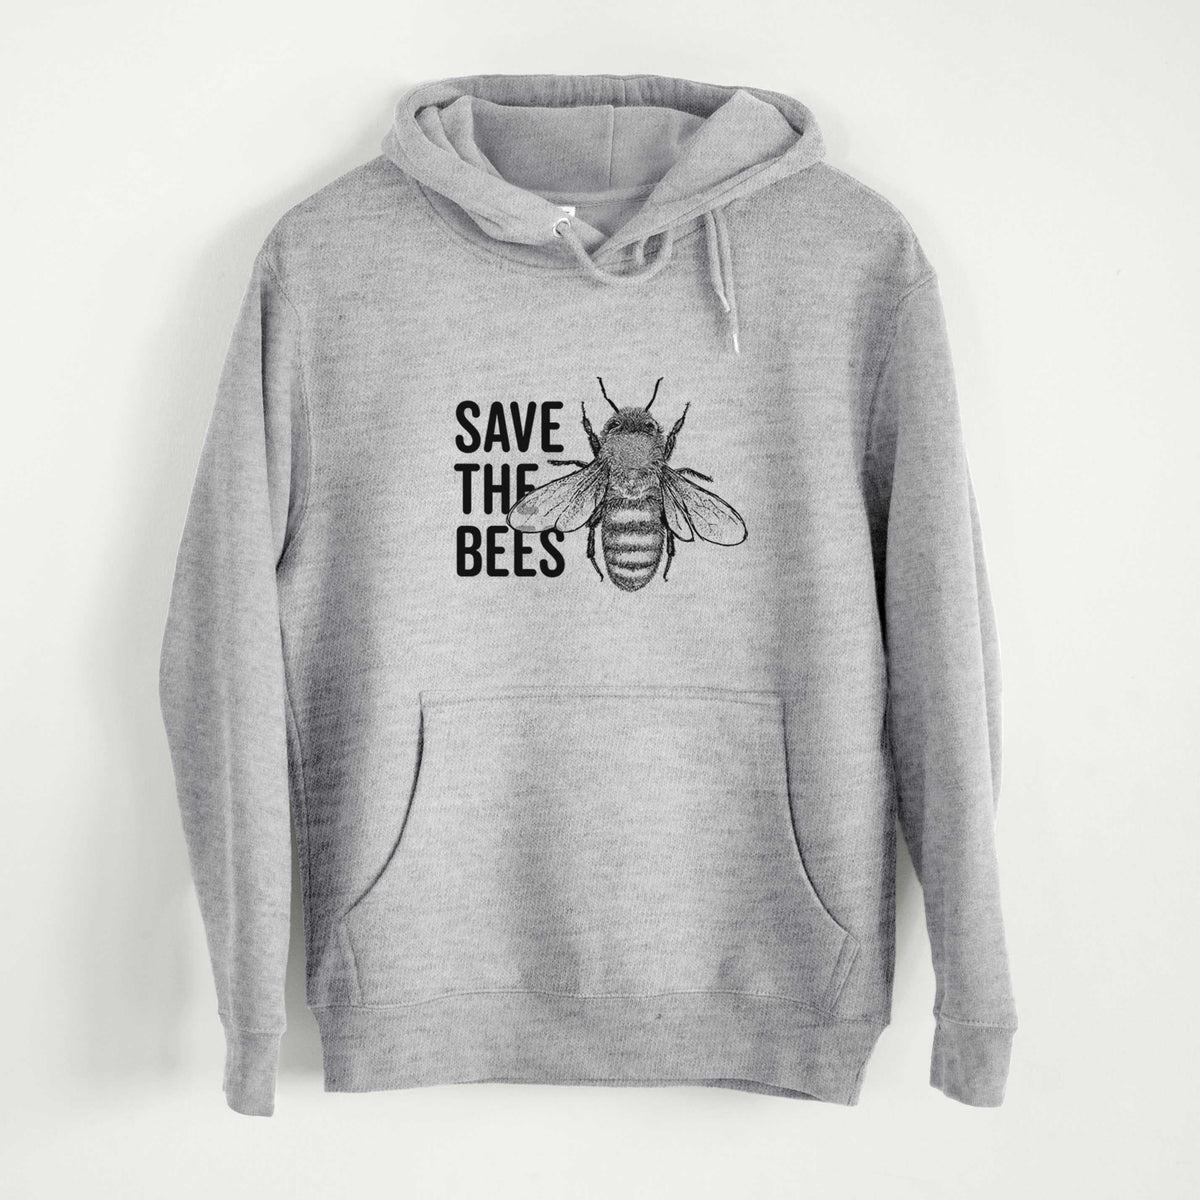 Save the Bees  - Mid-Weight Unisex Premium Blend Hoodie